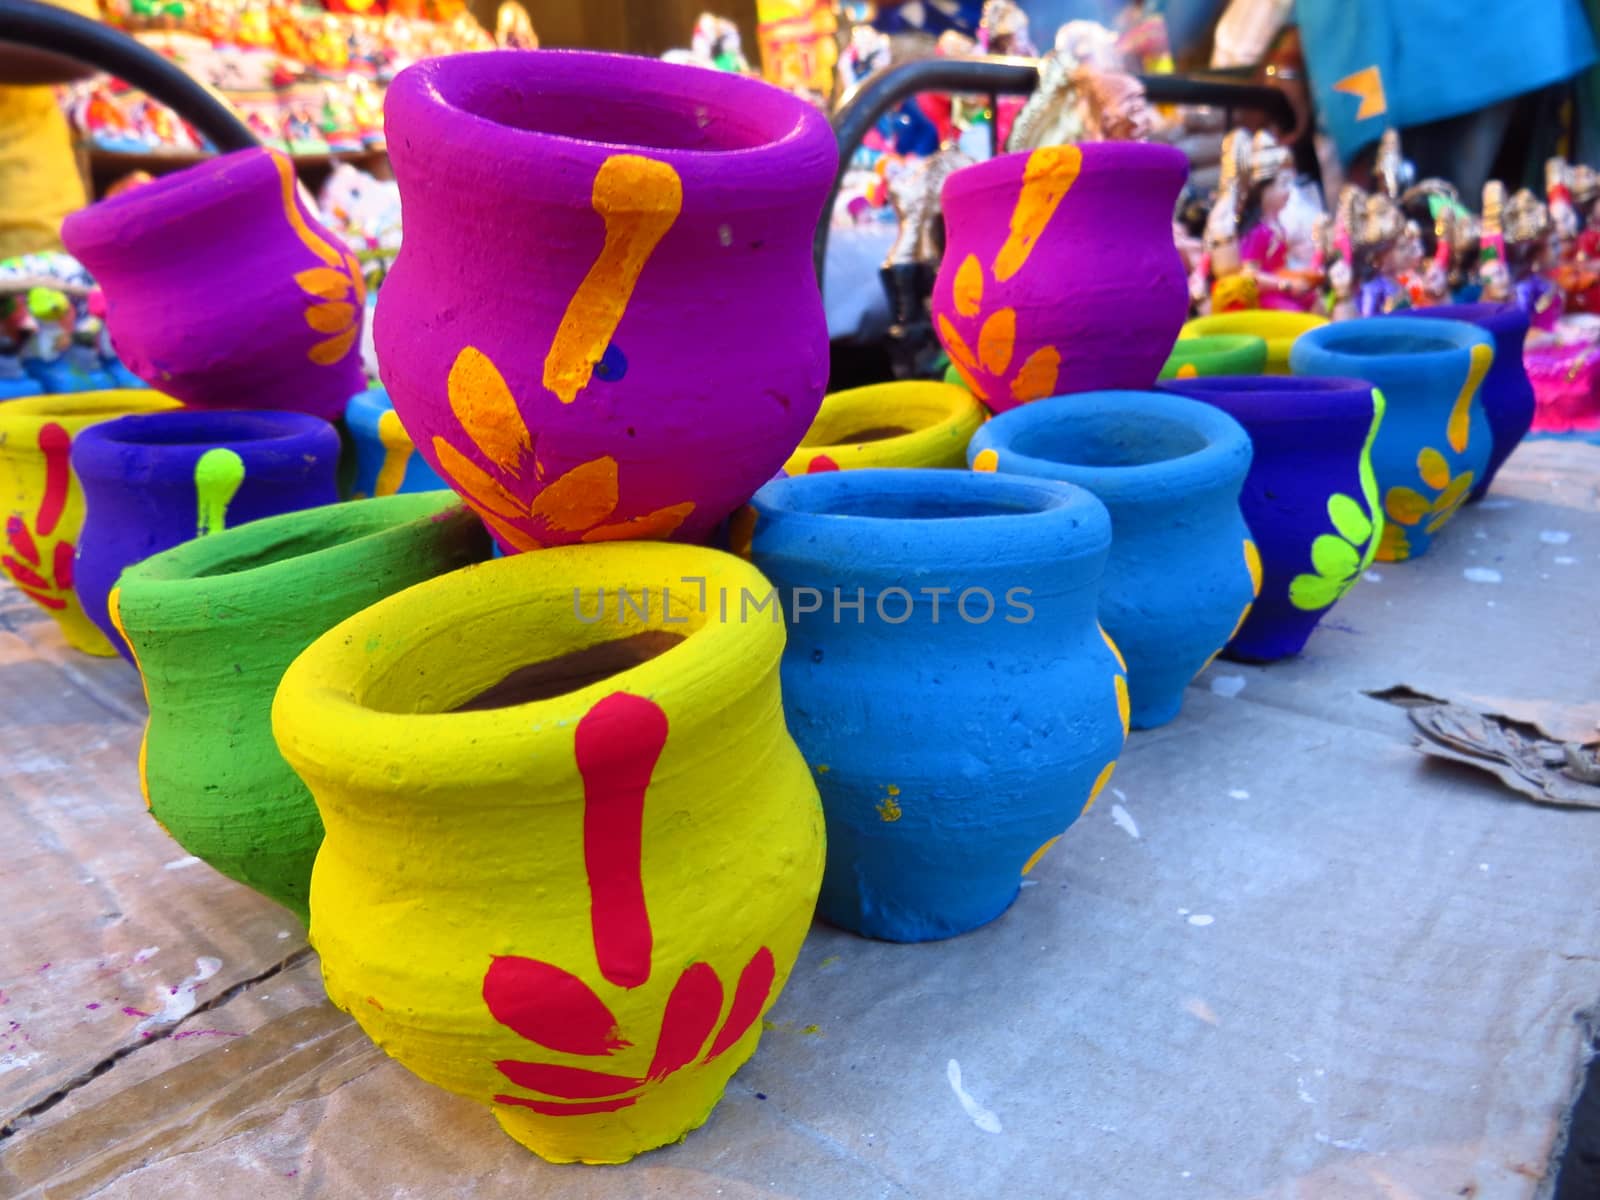 Colorful traditional pots used for rituals and pujas during the Diwali festival in India.                               